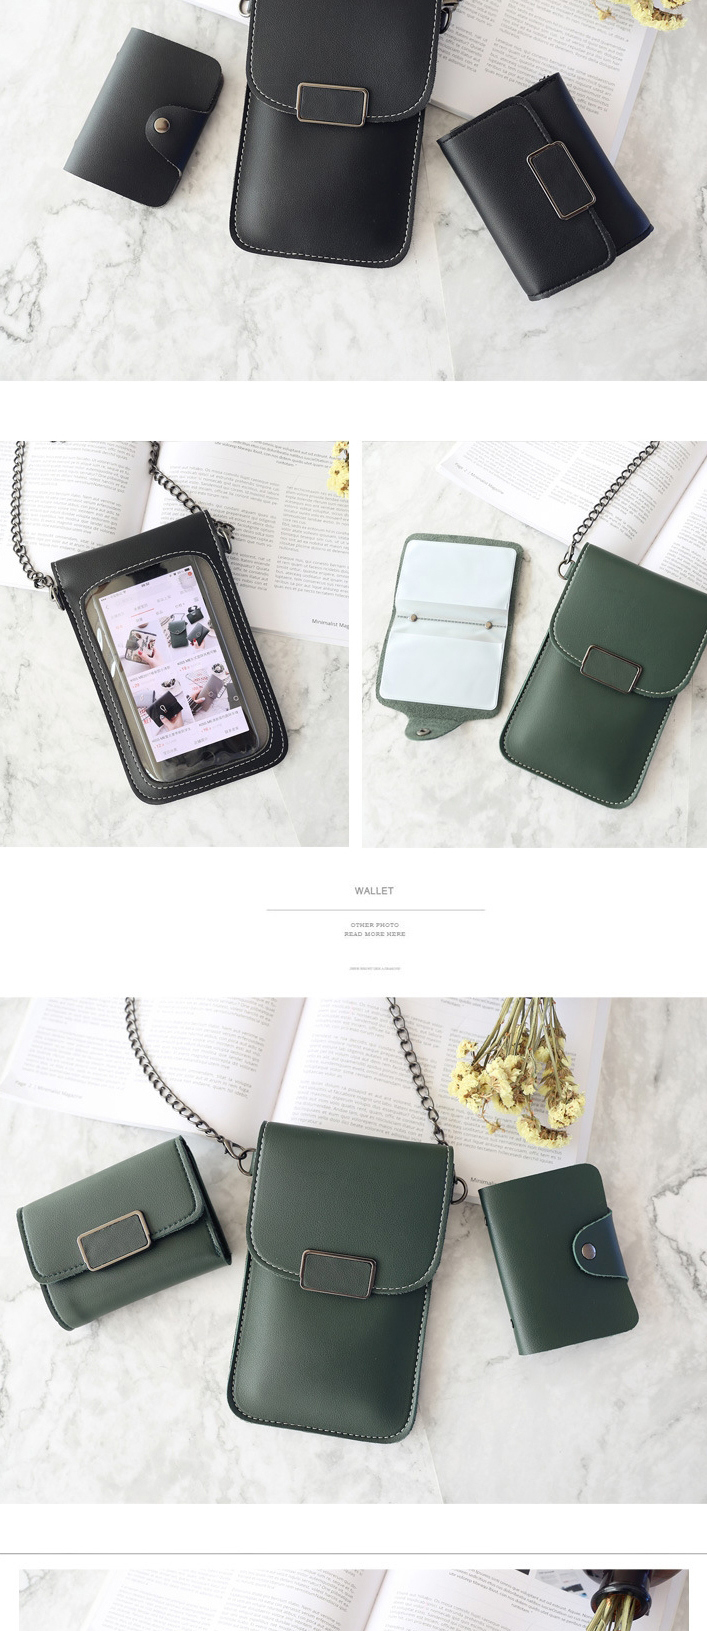 Fashion Light Grey Three-piece Set Of Square Buckle Touch Screen Chain Mobile Phone Bag Wallet Card Bag,Wallet